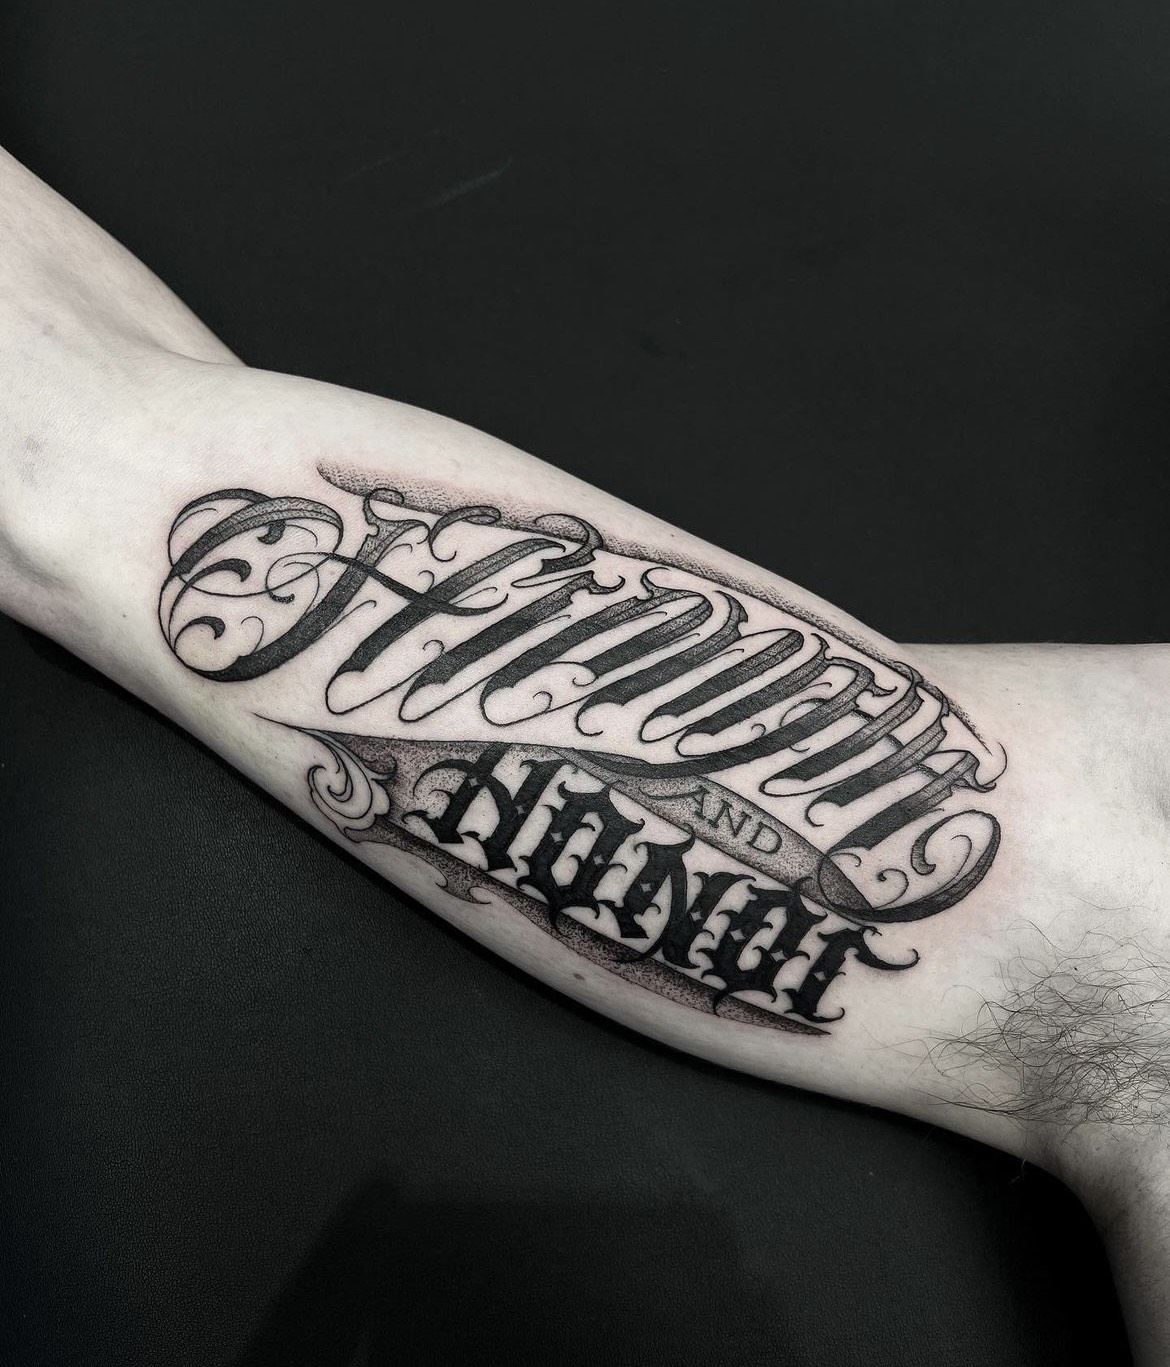 my second attempt at doing a script tattoo using SnP! was a challenge but I  was pretty happy with the outcome. if you have any feedback do let me know!  using tight